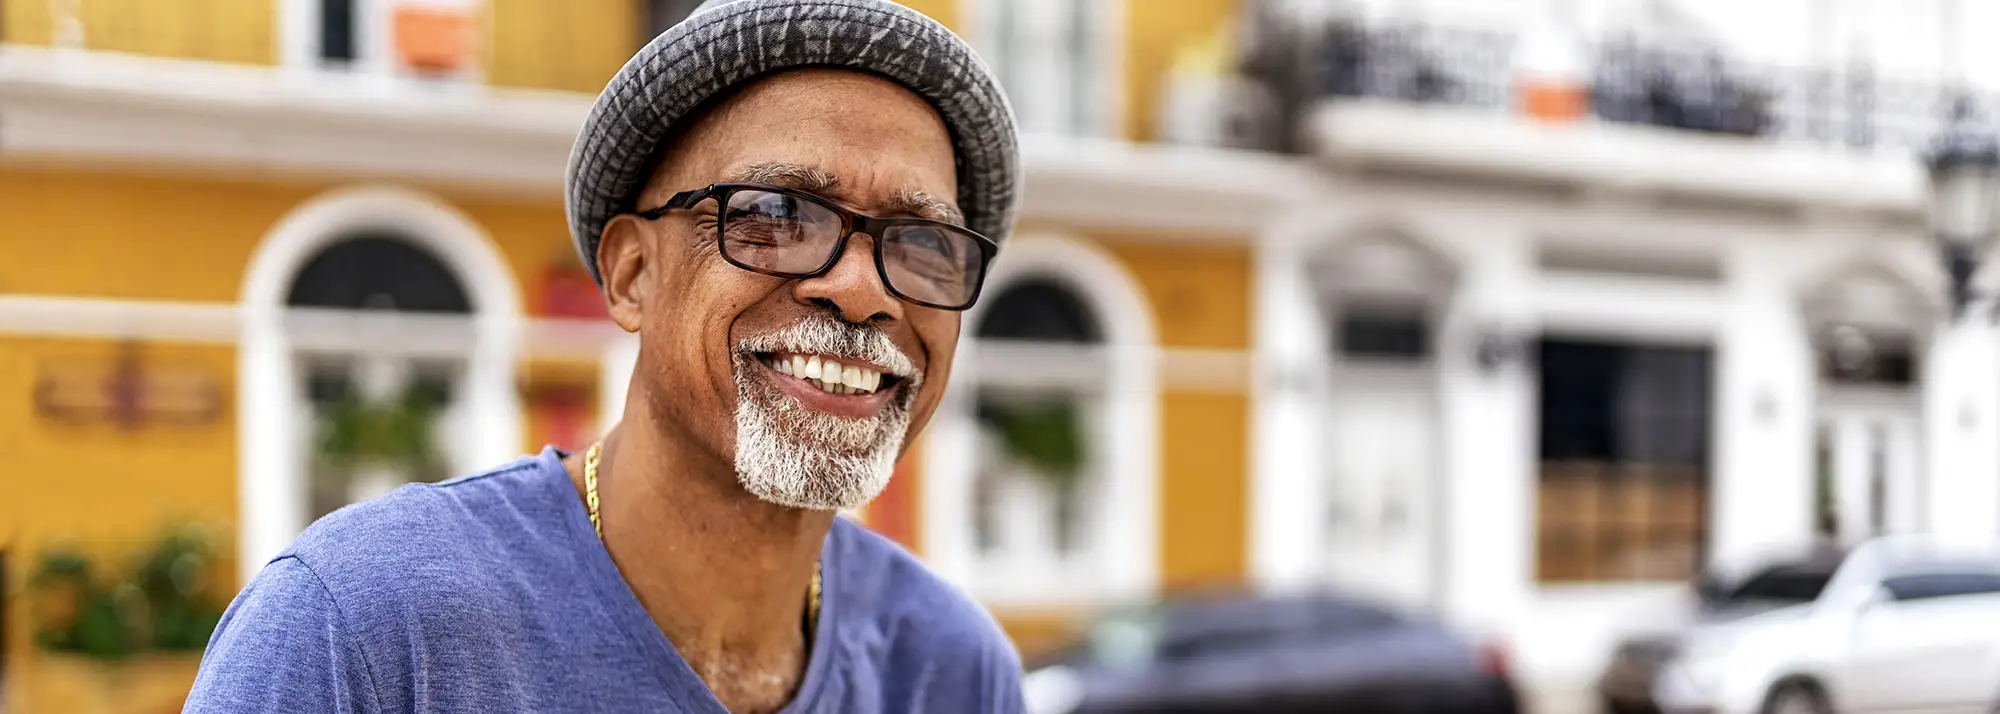 man with glasses smiling 2000x714.webp